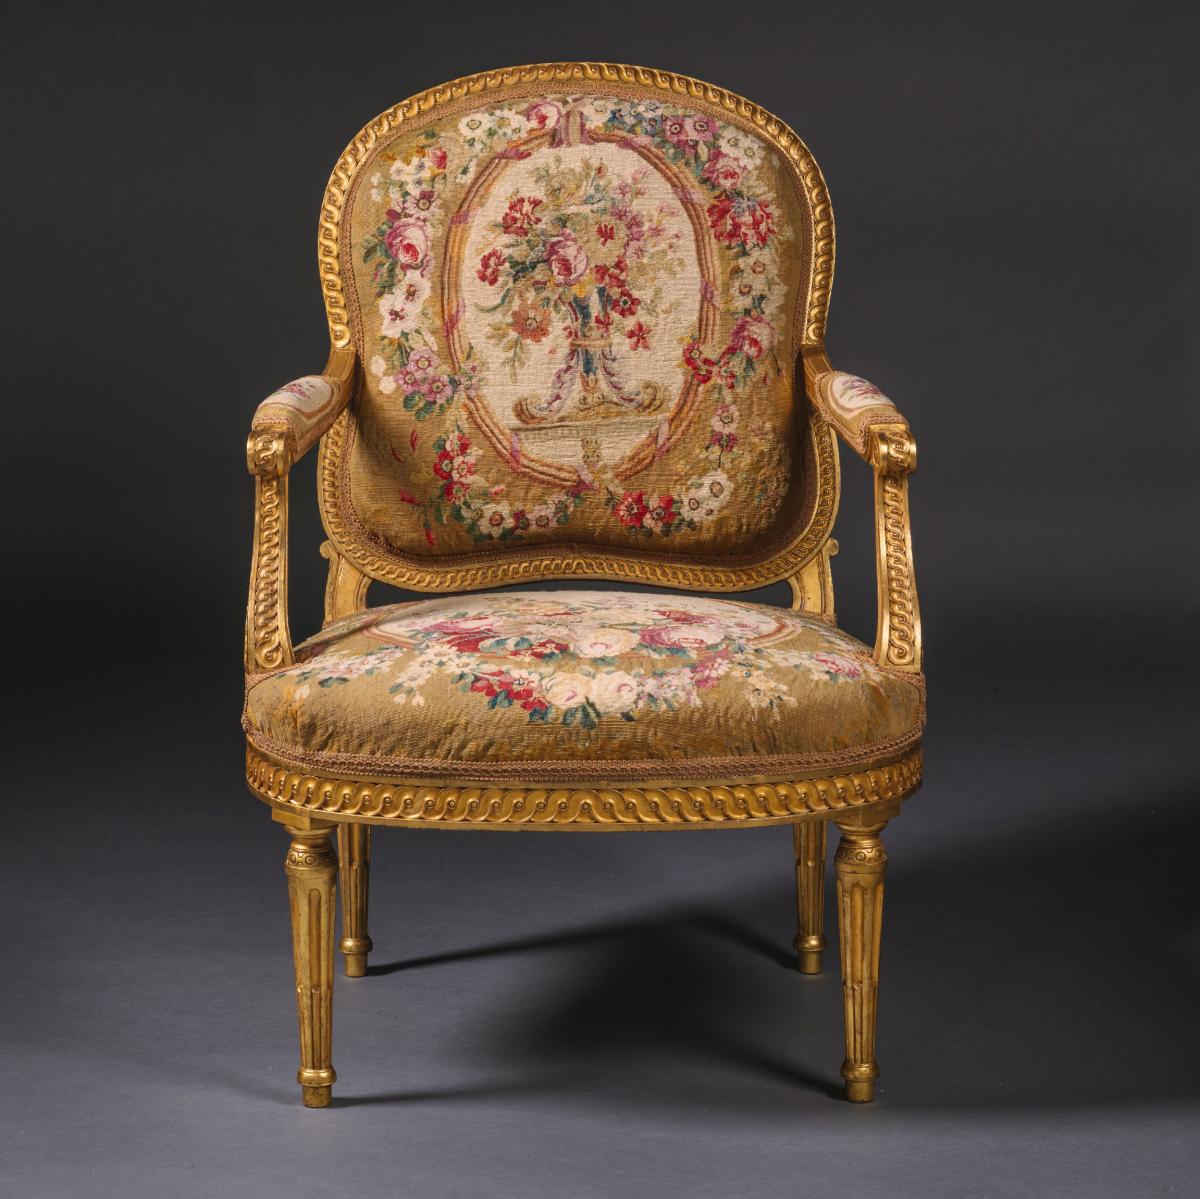 A Pair of Louis XVI Style Giltwood and Tapestry Fauteuils. France, Circa 1870. Adrian Alan Ltd